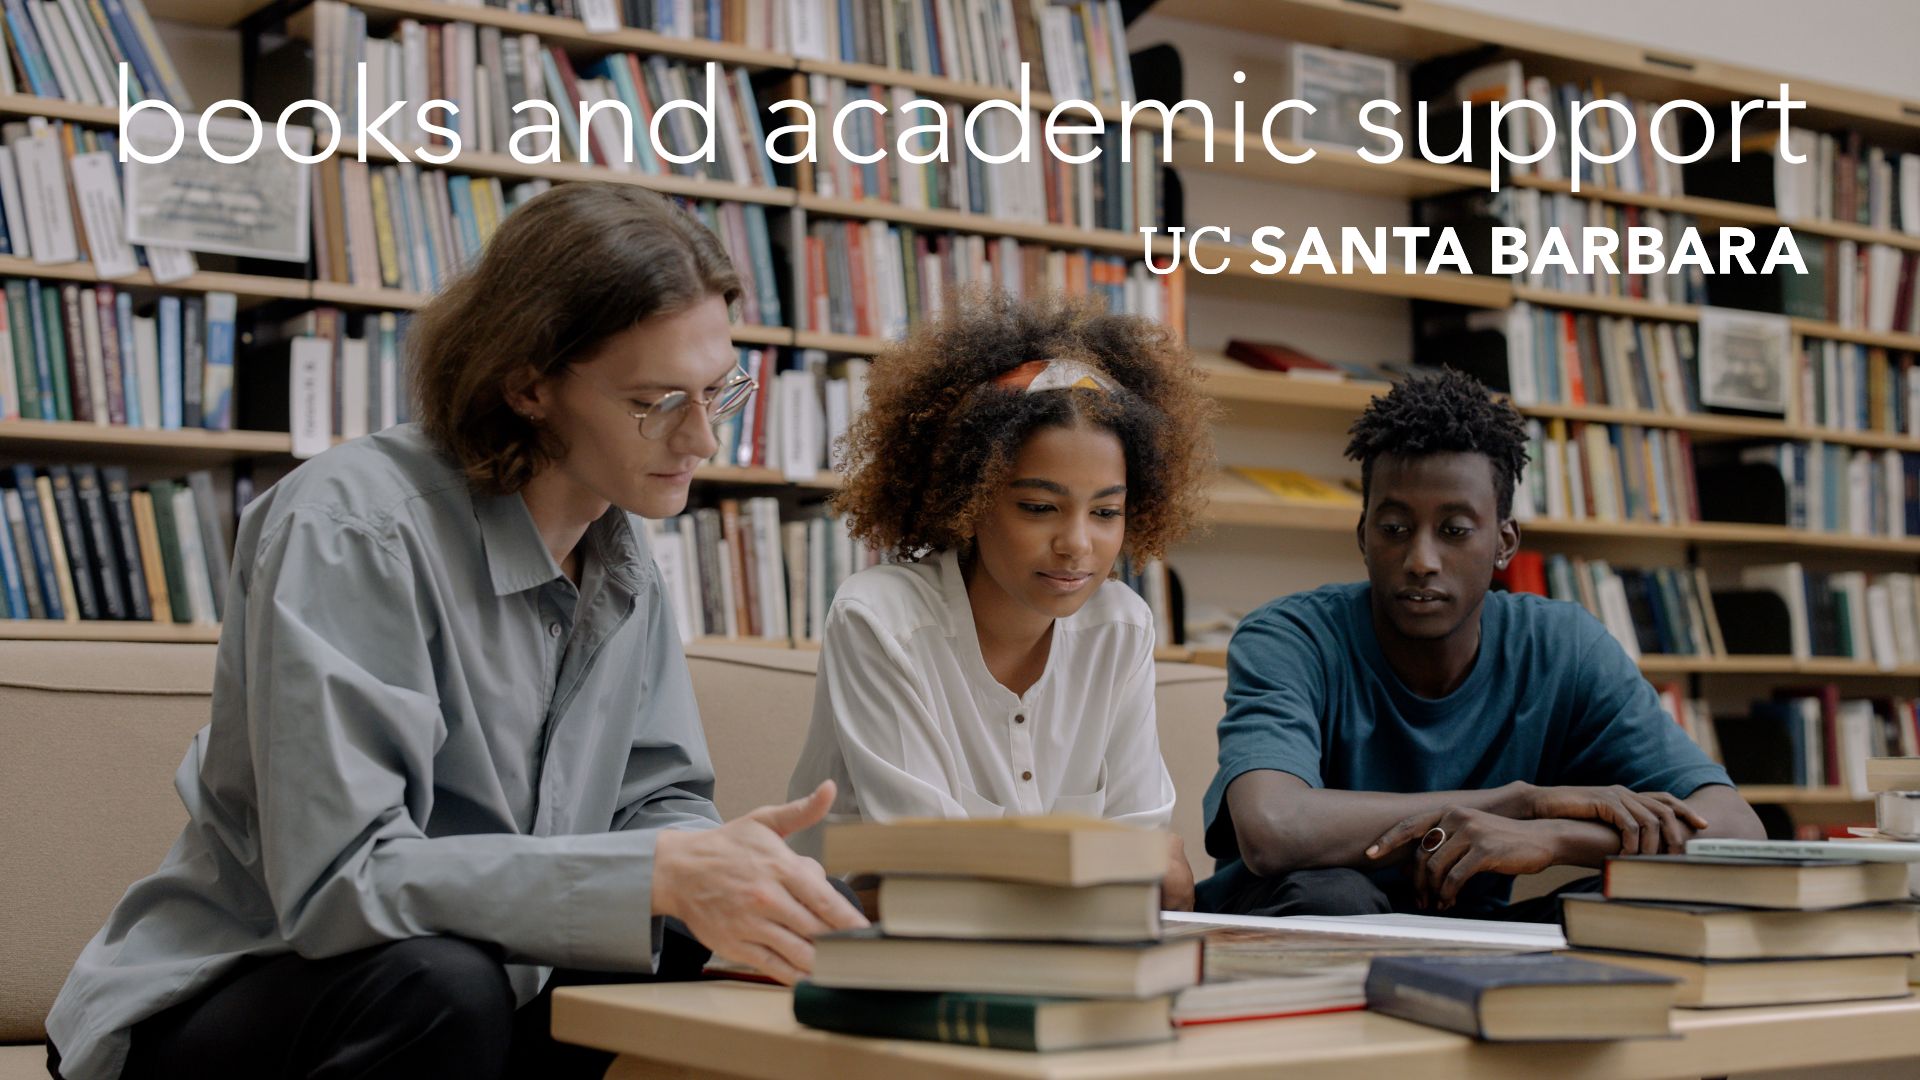 books and academic support